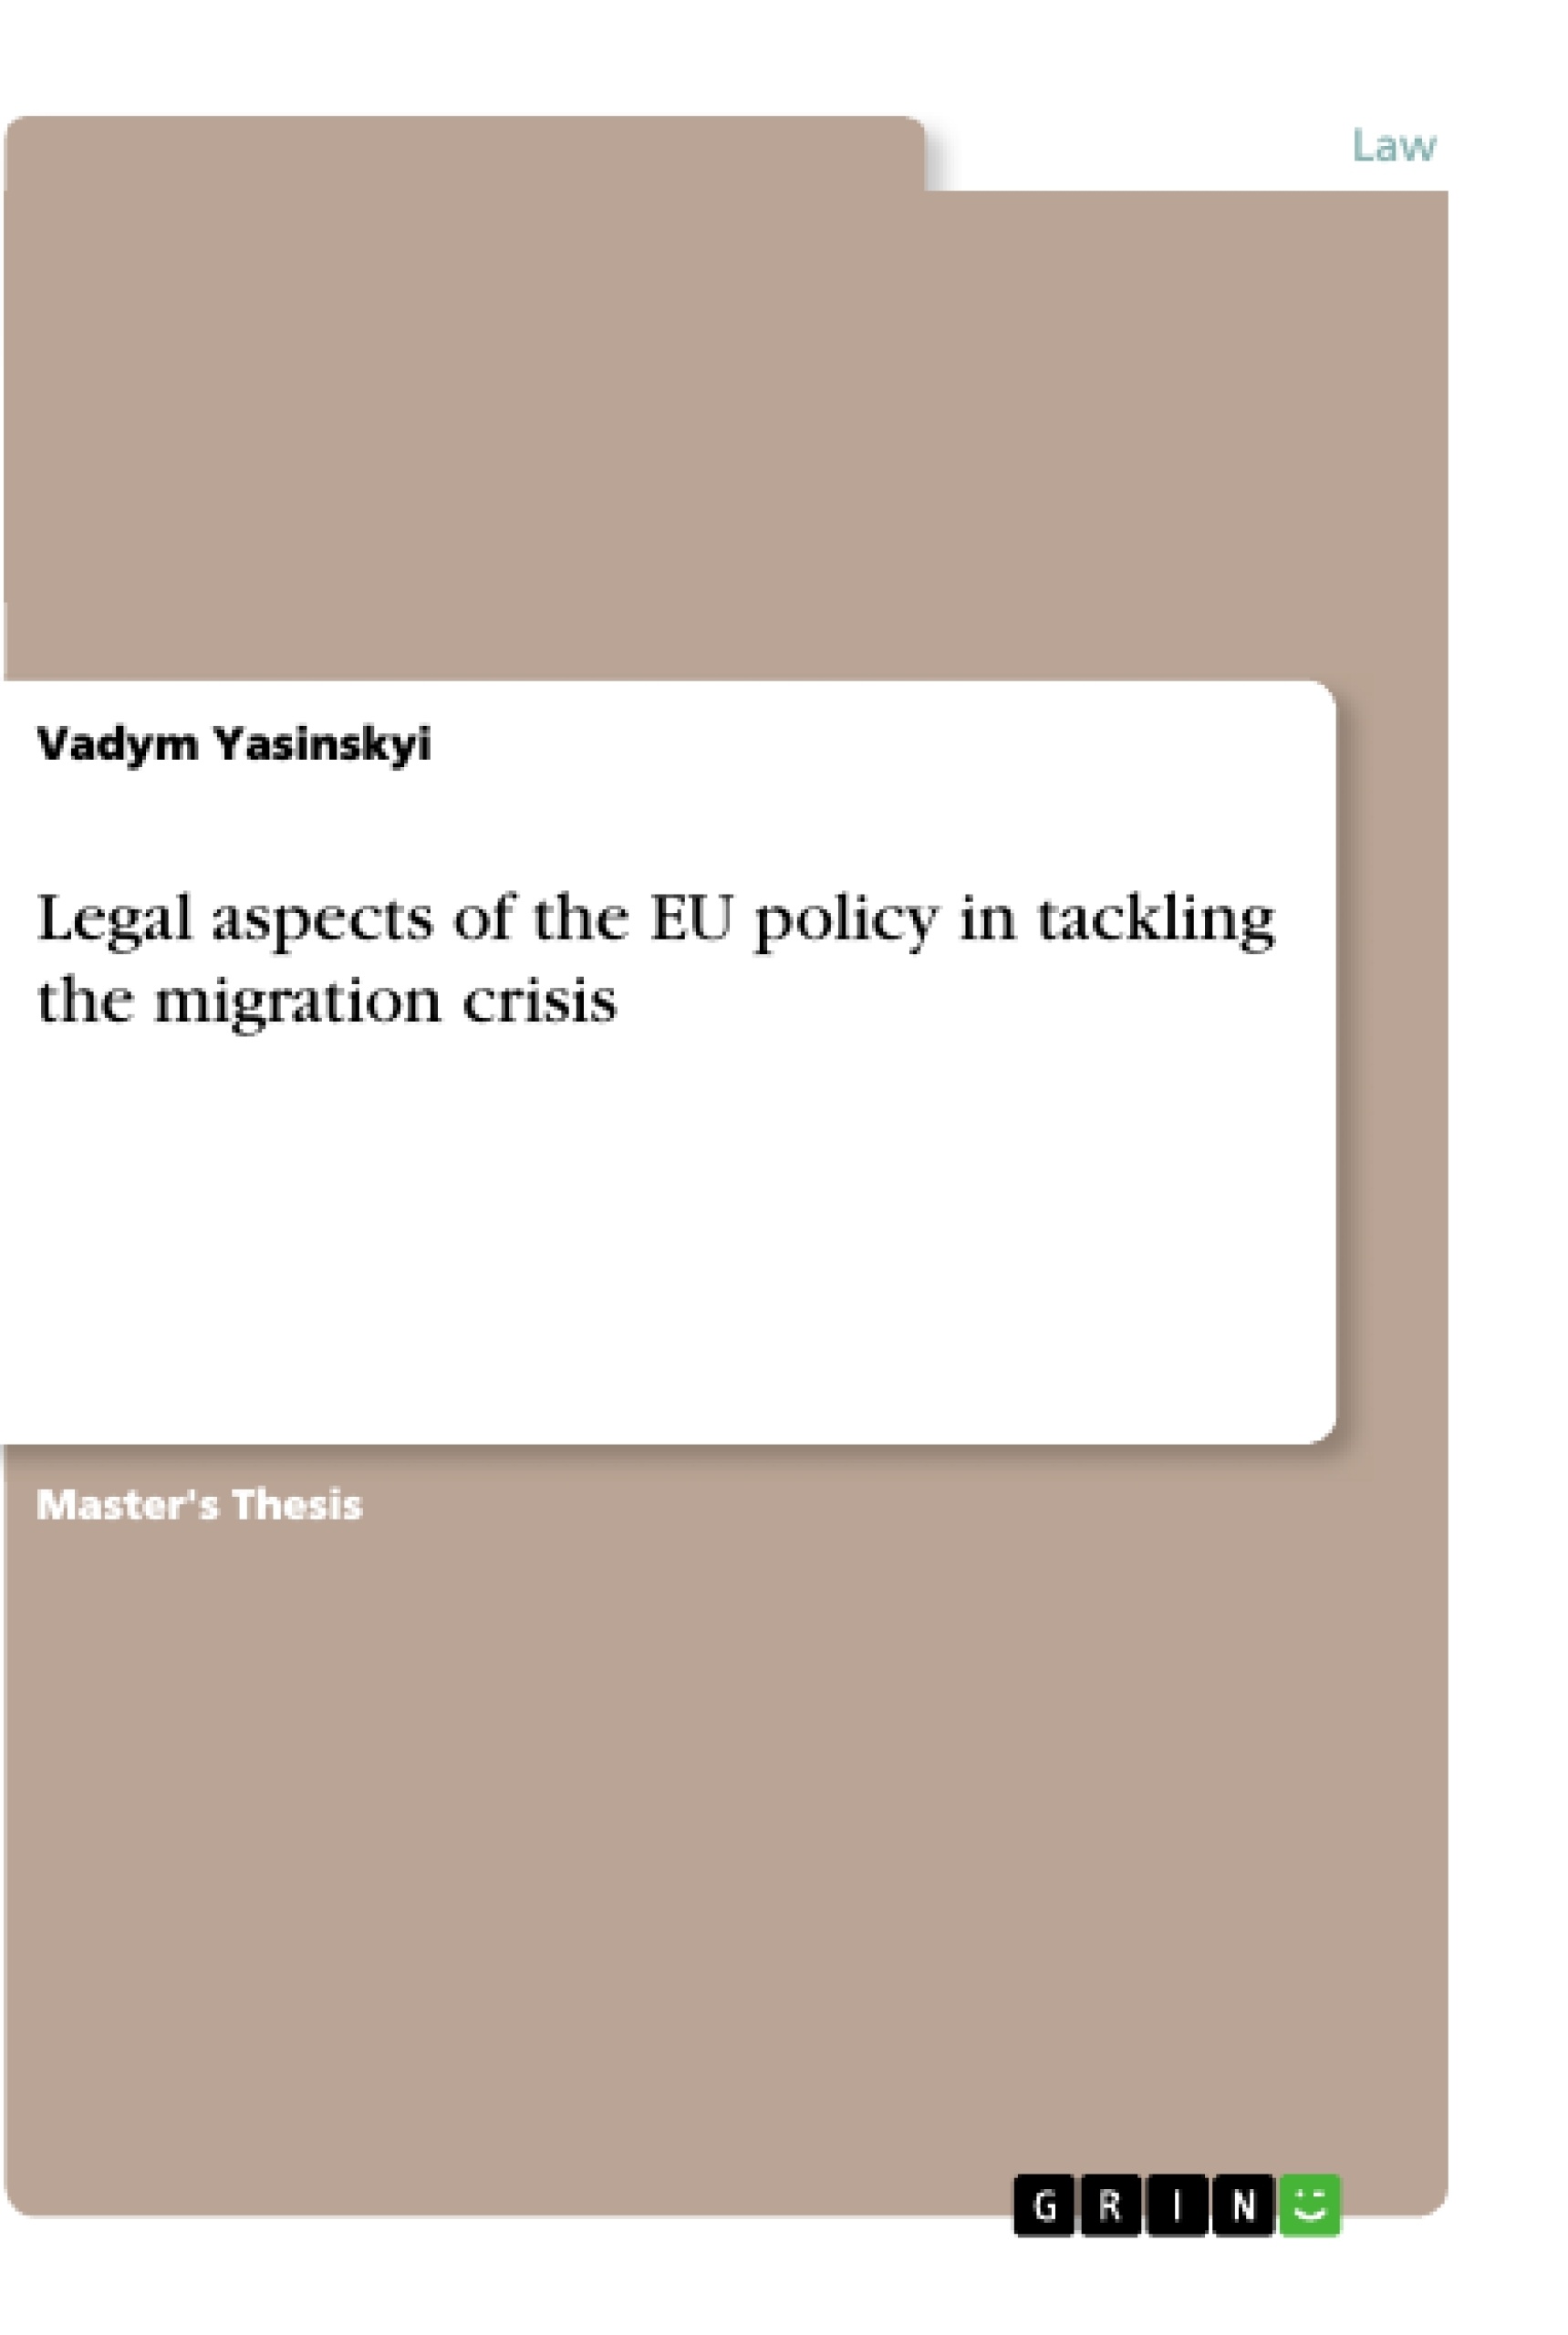 Title: Legal aspects of the EU policy in tackling the migration crisis